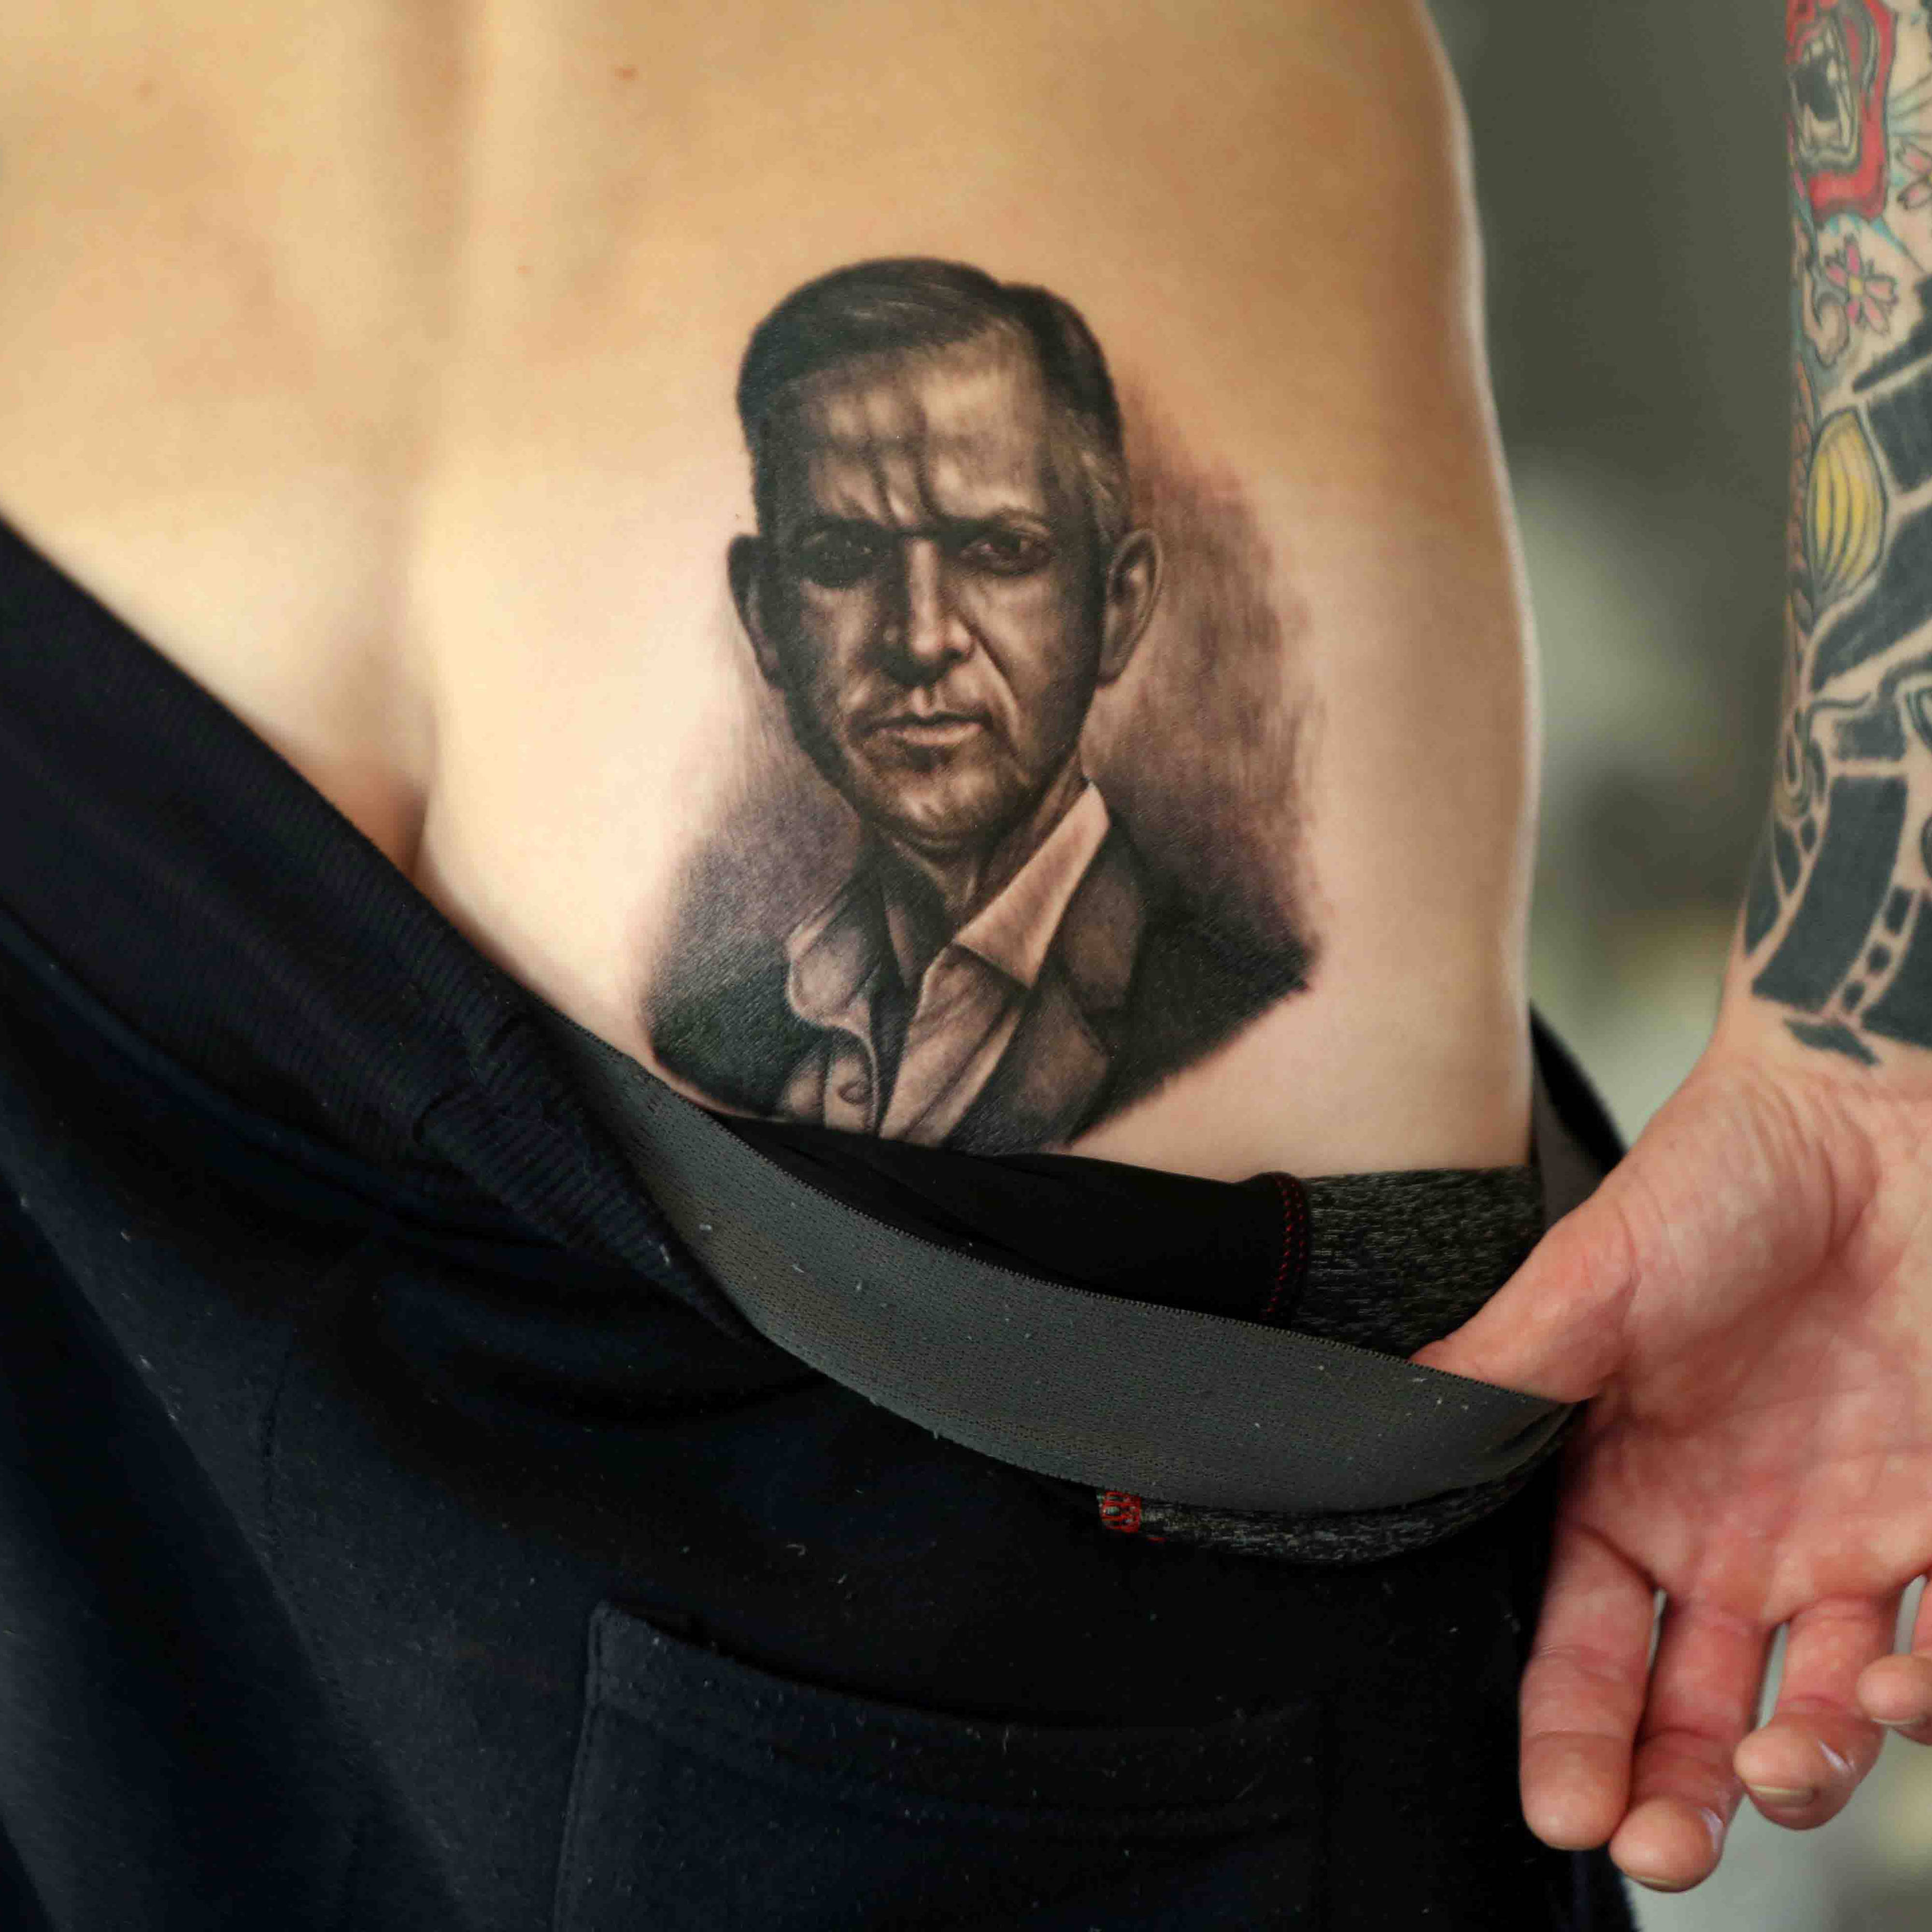 This man got a massive Jeremy Kyle tattoo on his bum - Heart